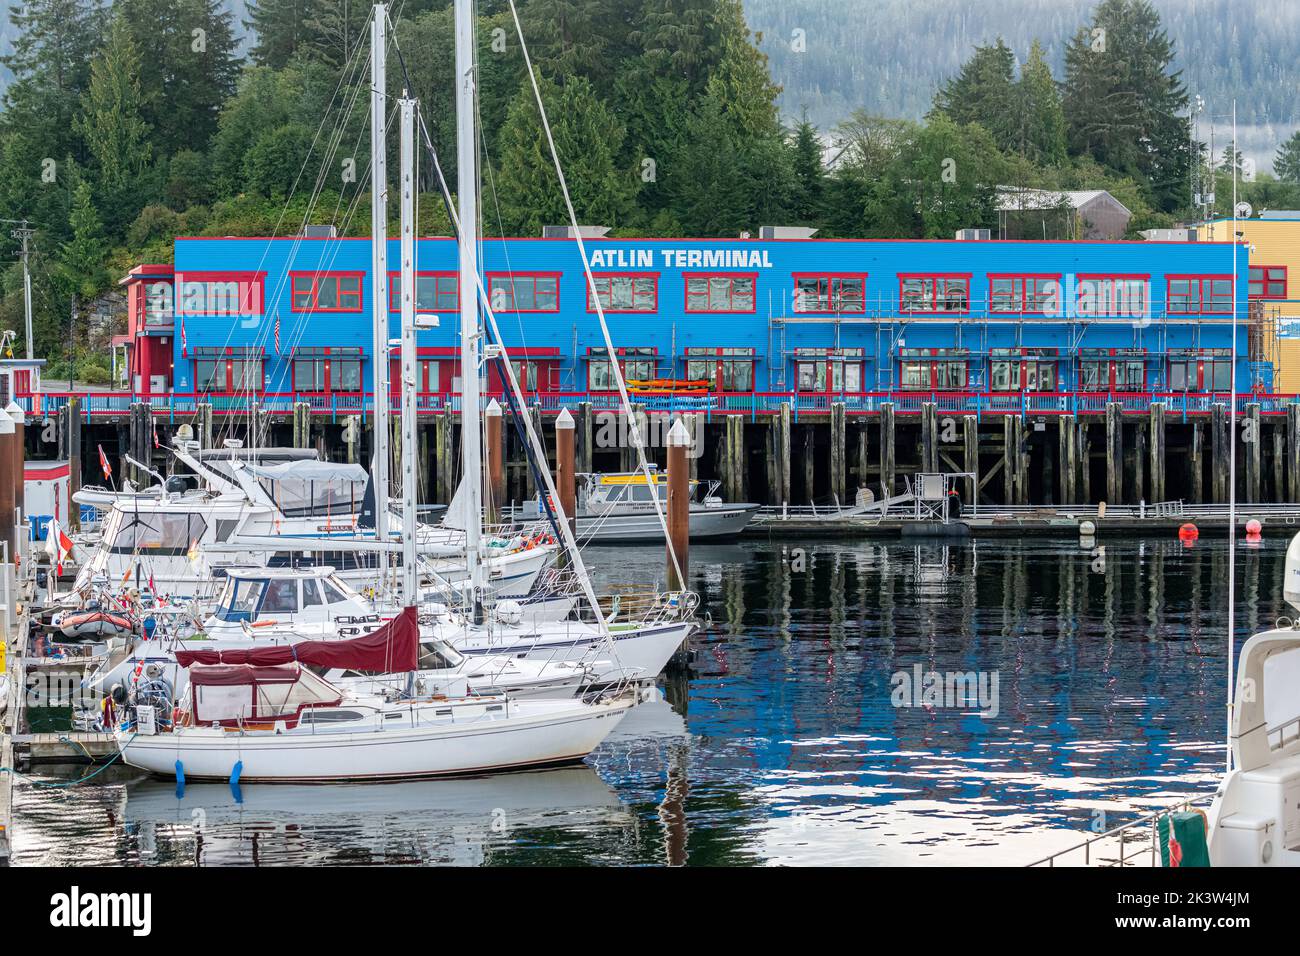 Boats at the dock in front of the Atlin Terminal at the harbour of Prince Rupert, British Columbia, Canada. Stock Photo